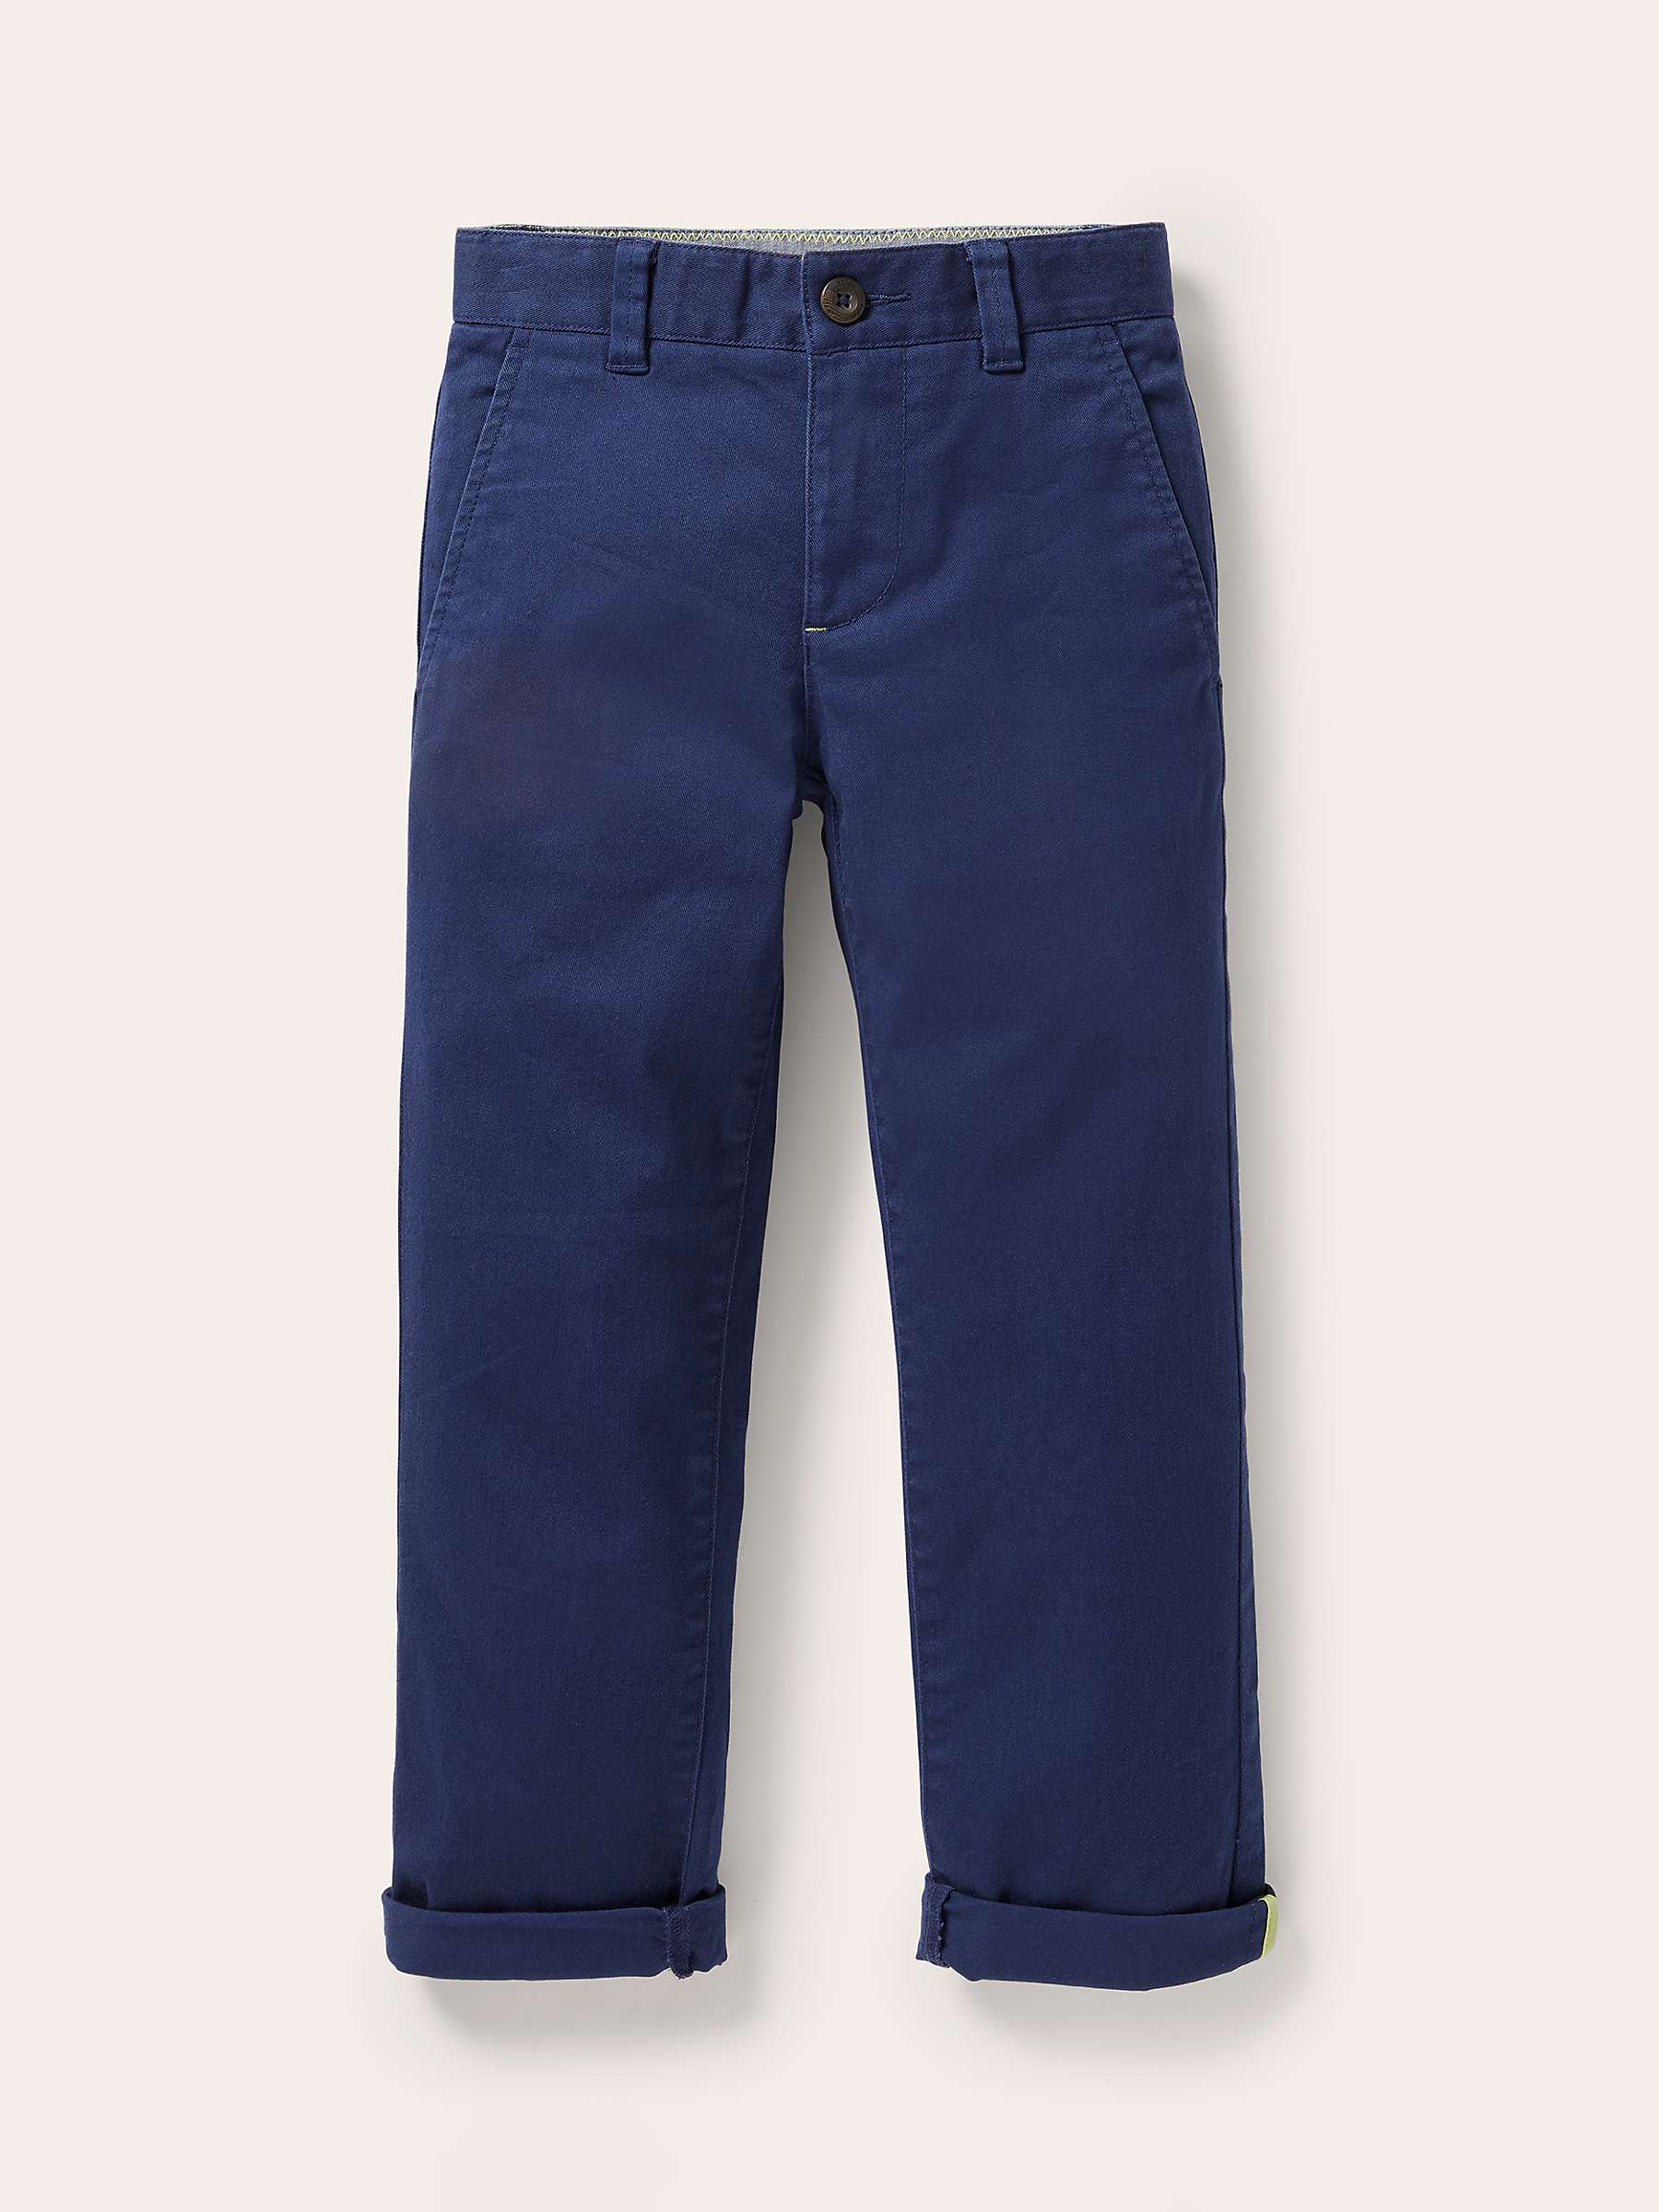 Buy Mini Boden Kids' Chino Stretch Trousers Online at johnlewis.com